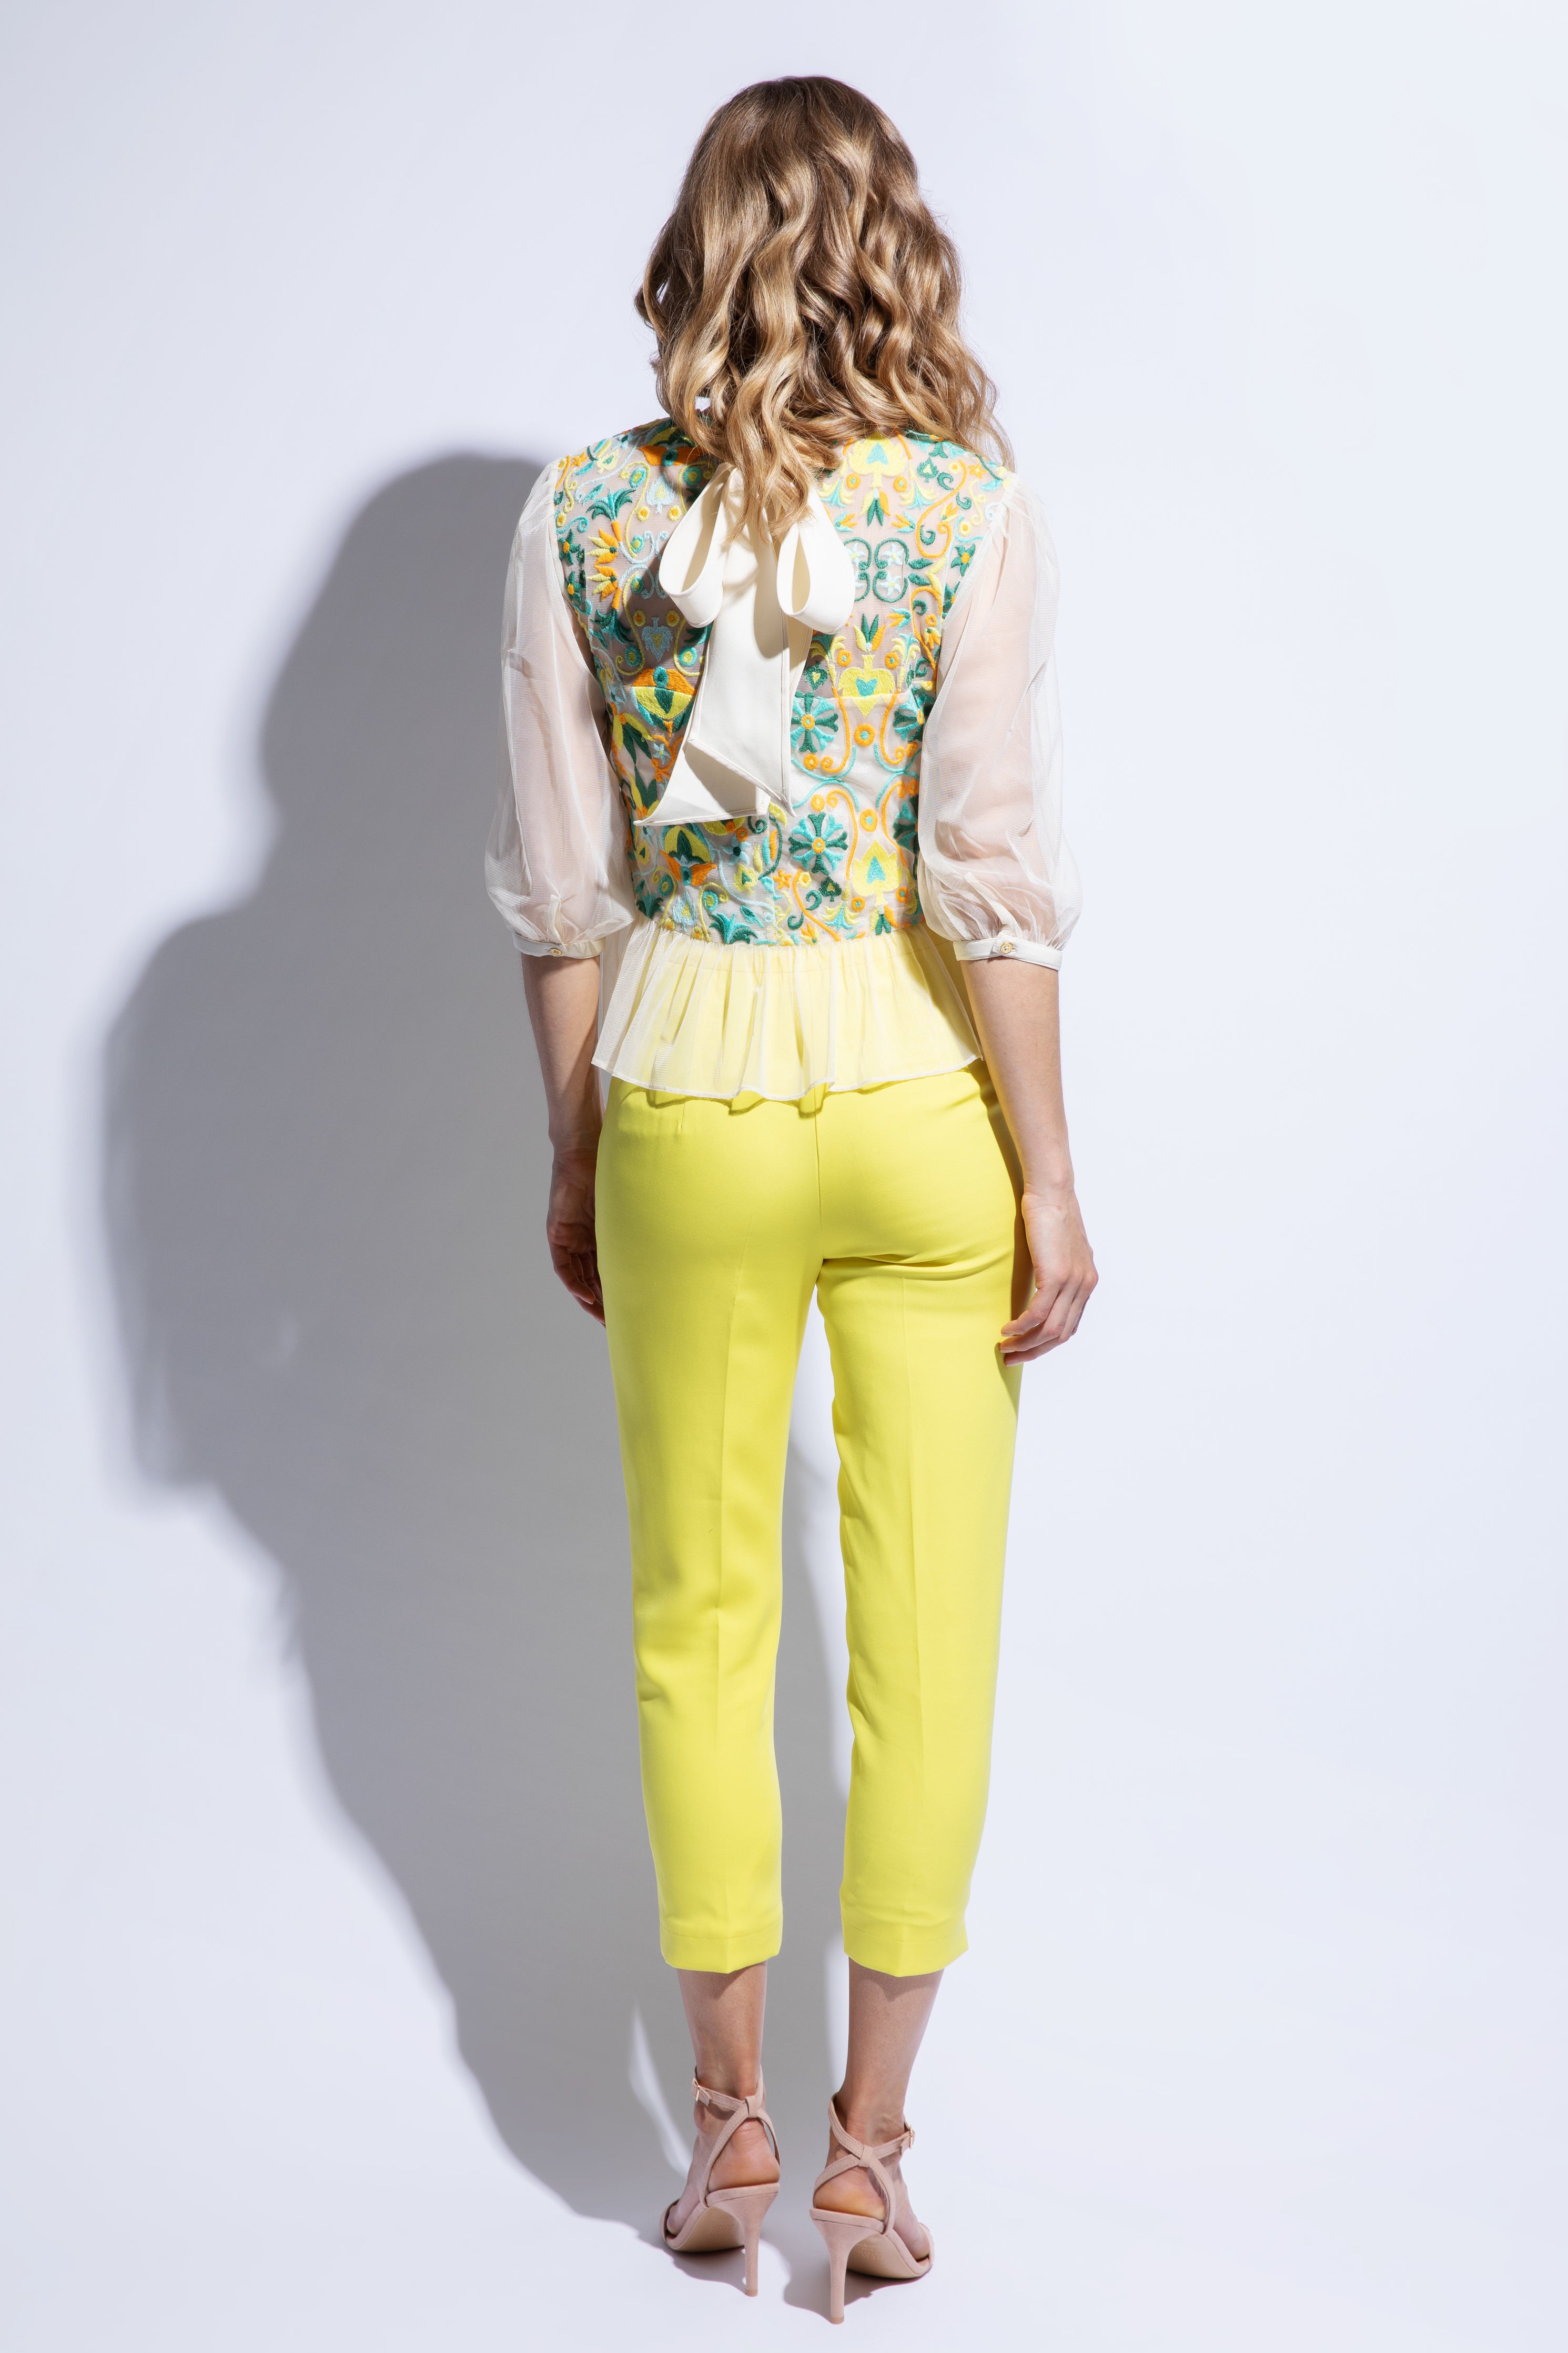 Back view of embroidered sheer top and bow detail and tailored cropped yellow trouser